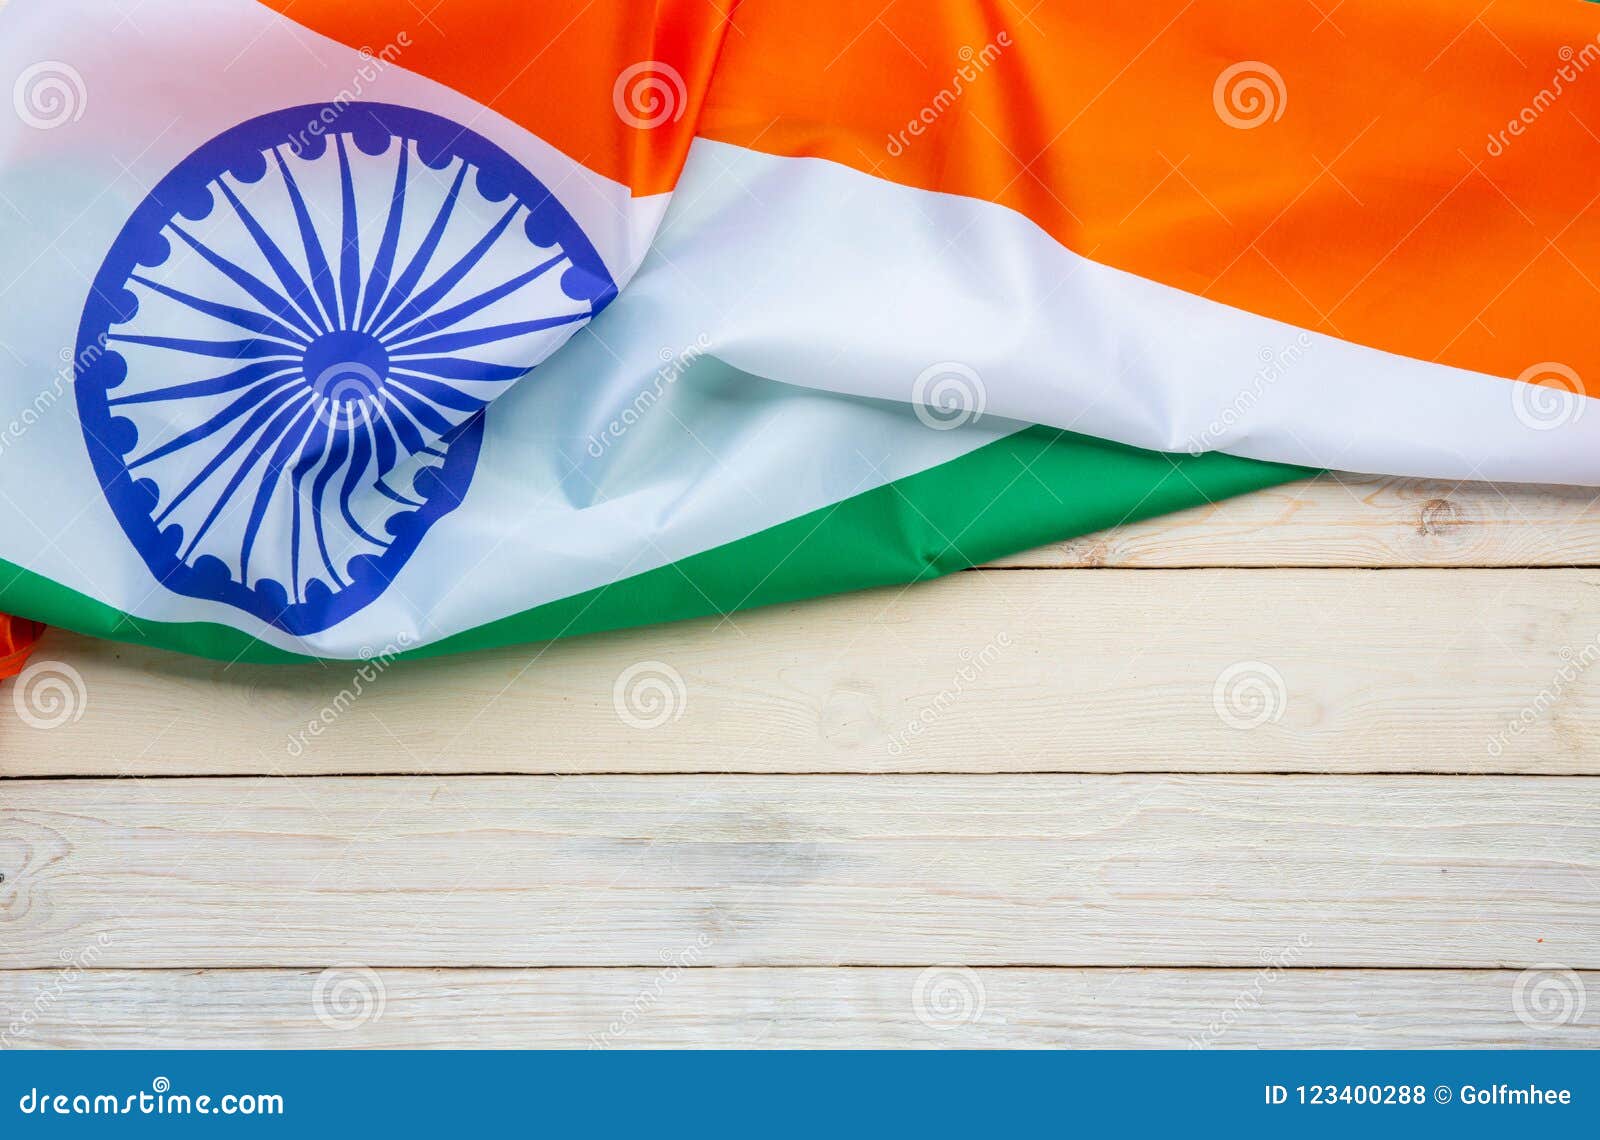 India Flag on Wood Texture Background Concept for 15 August ...